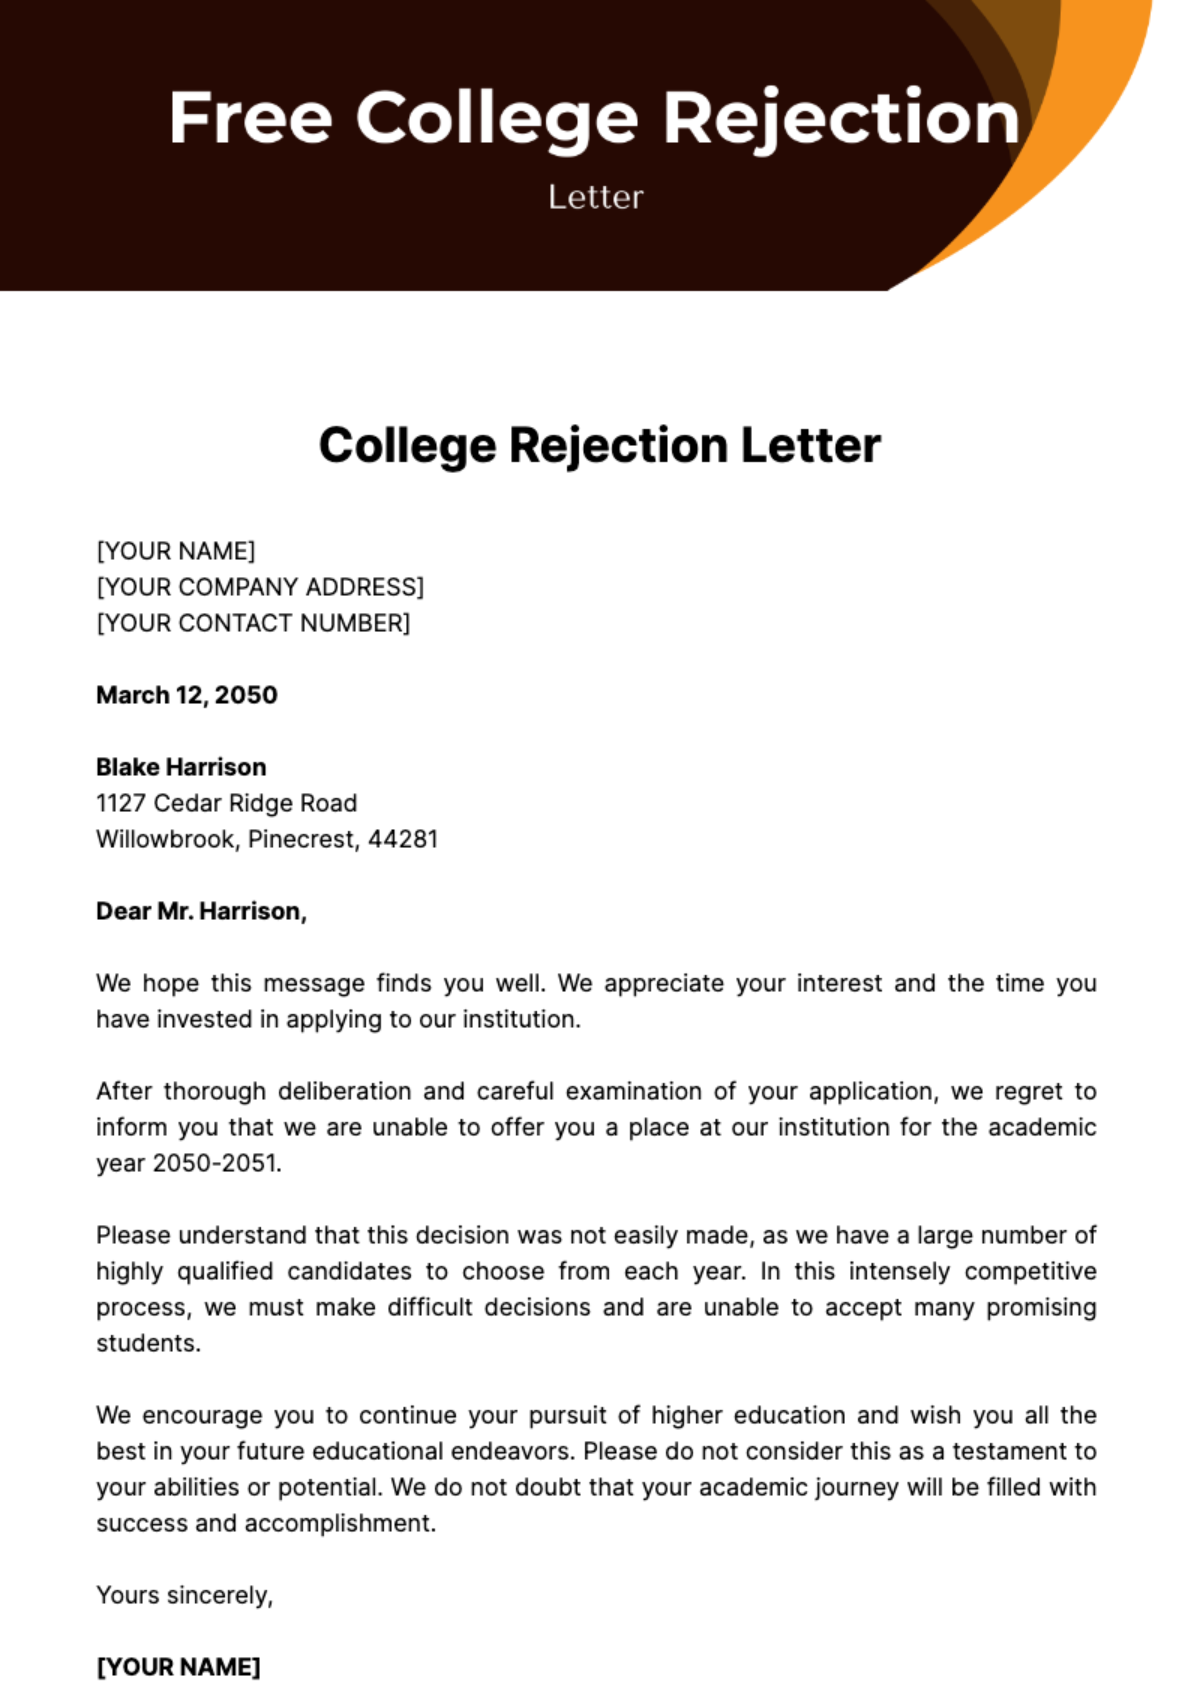 Free College Rejection Letter Template